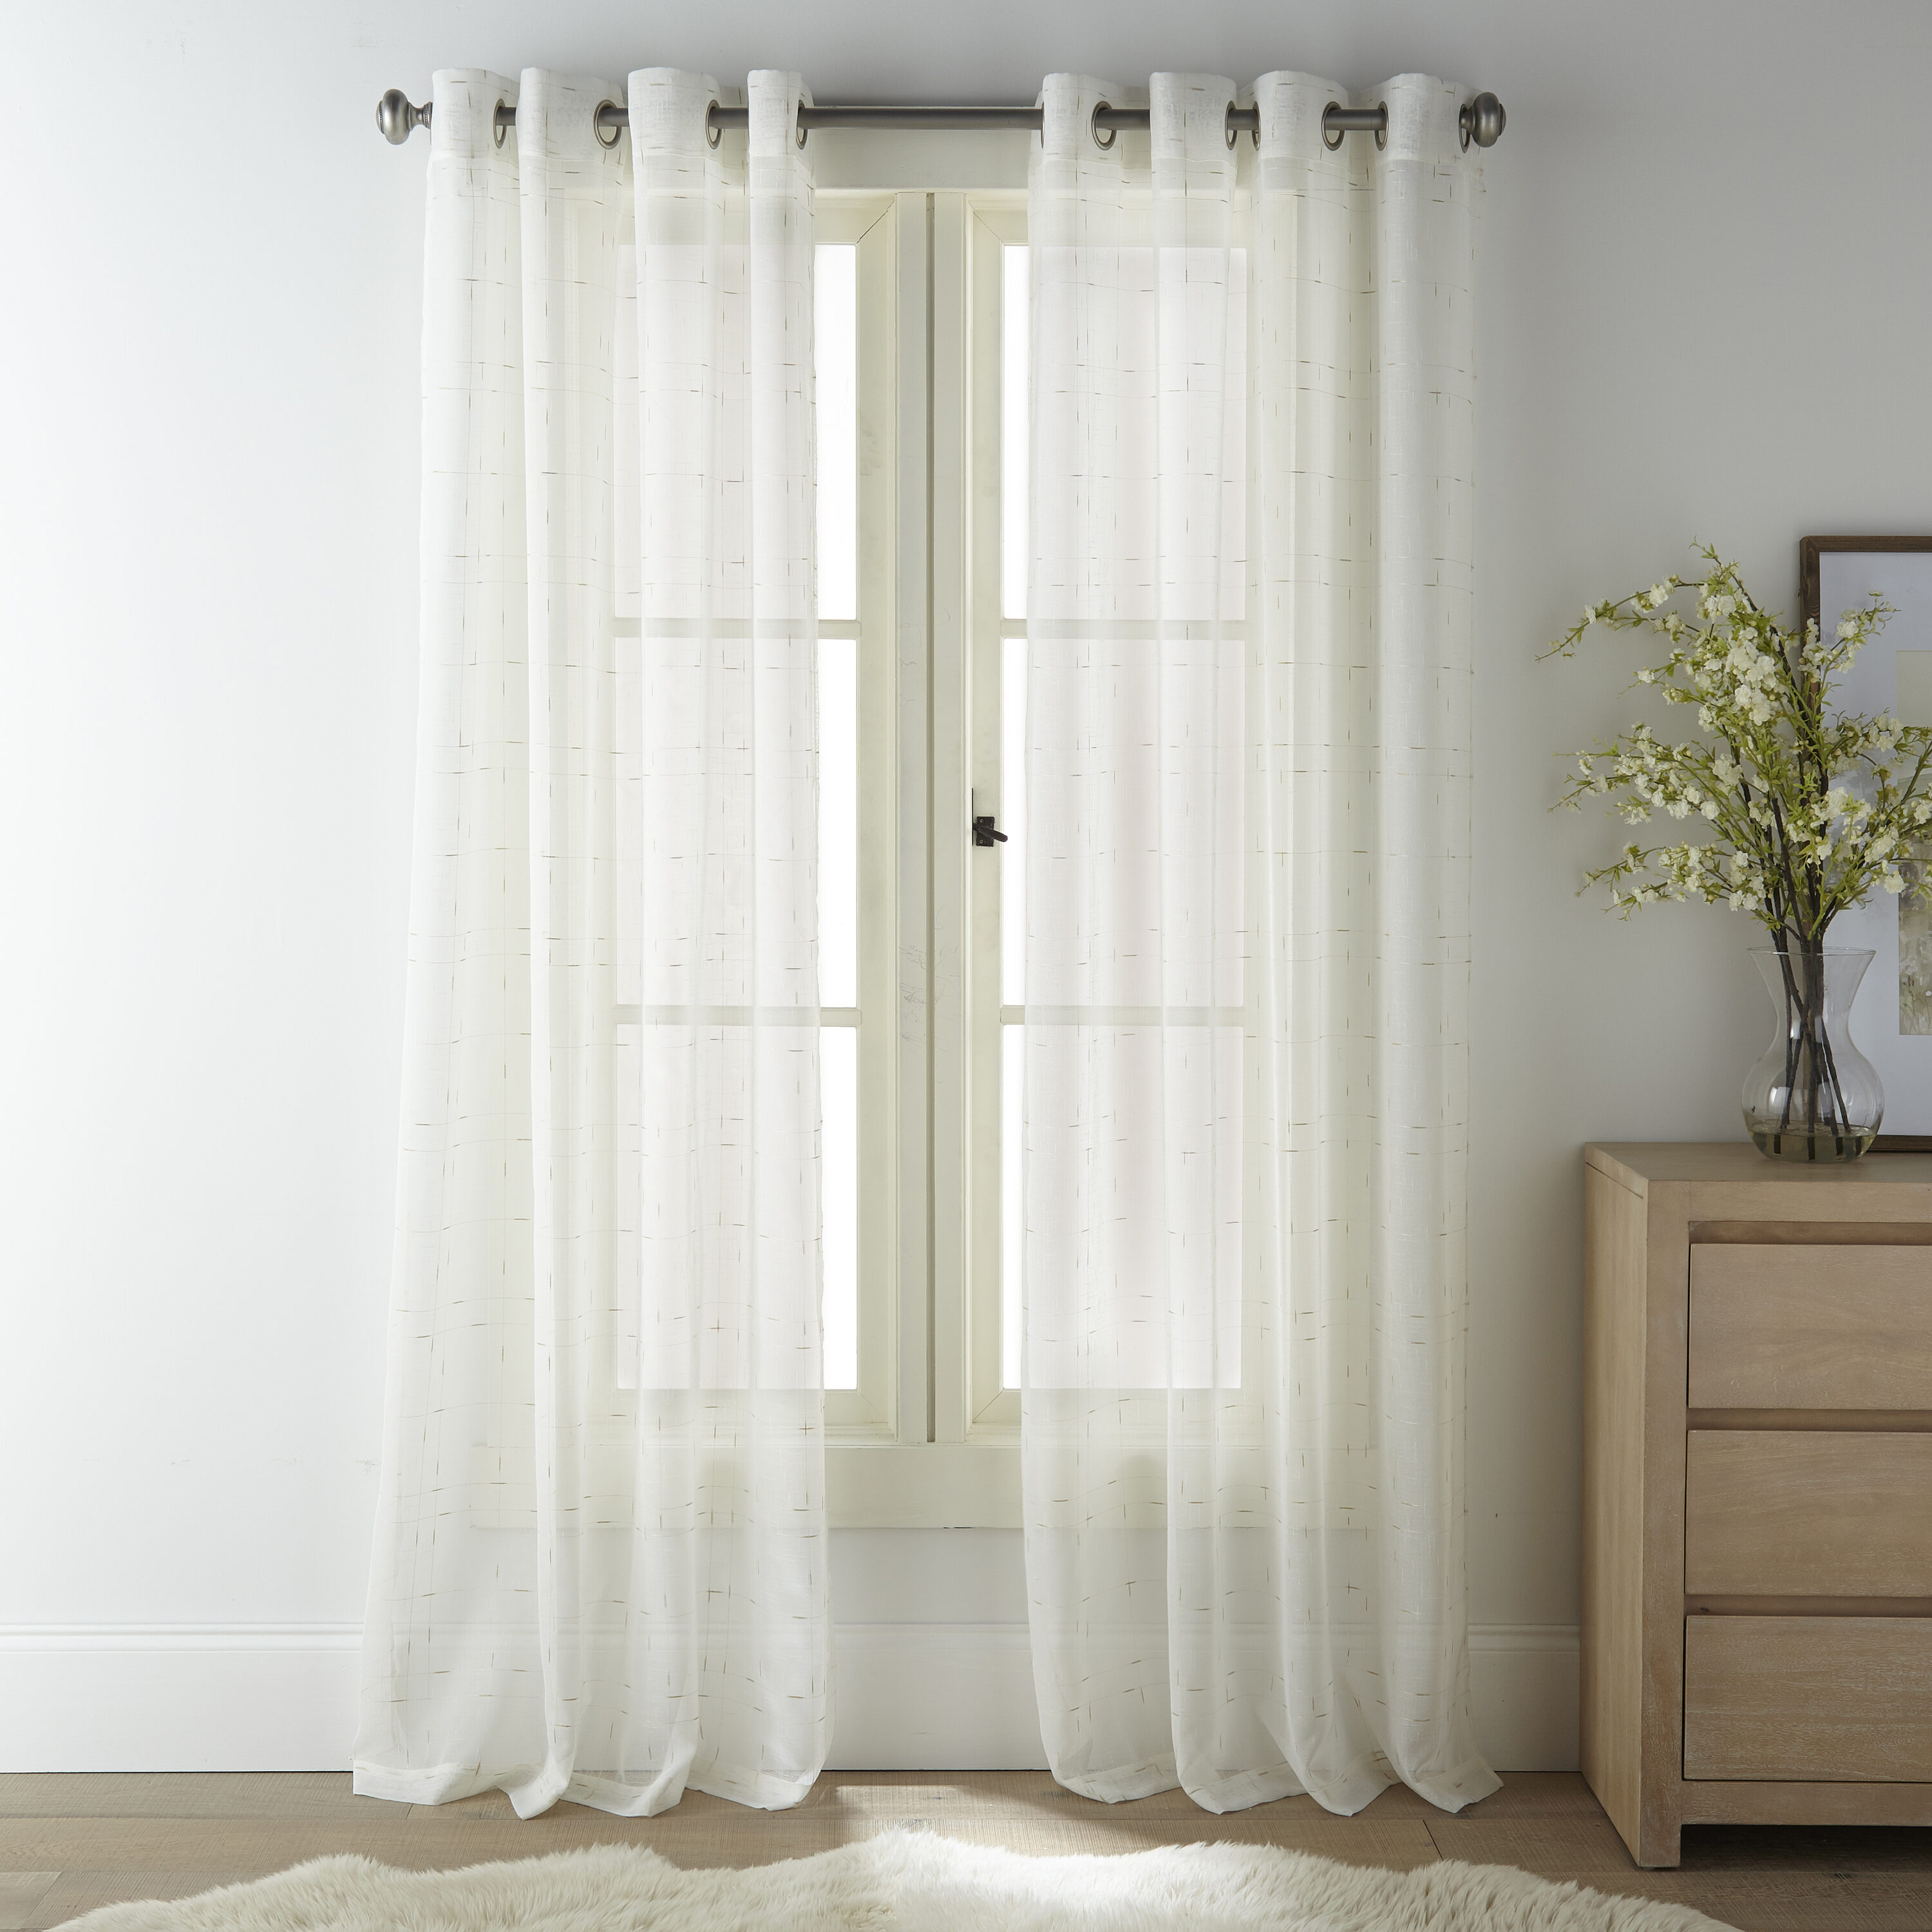  HLC.ME White Window Curtain Sheer Voile Panels for Small Windows,  Kitchen, Living Room and Bedroom (54 x 54 inches Long, Set of 2) : Home &  Kitchen